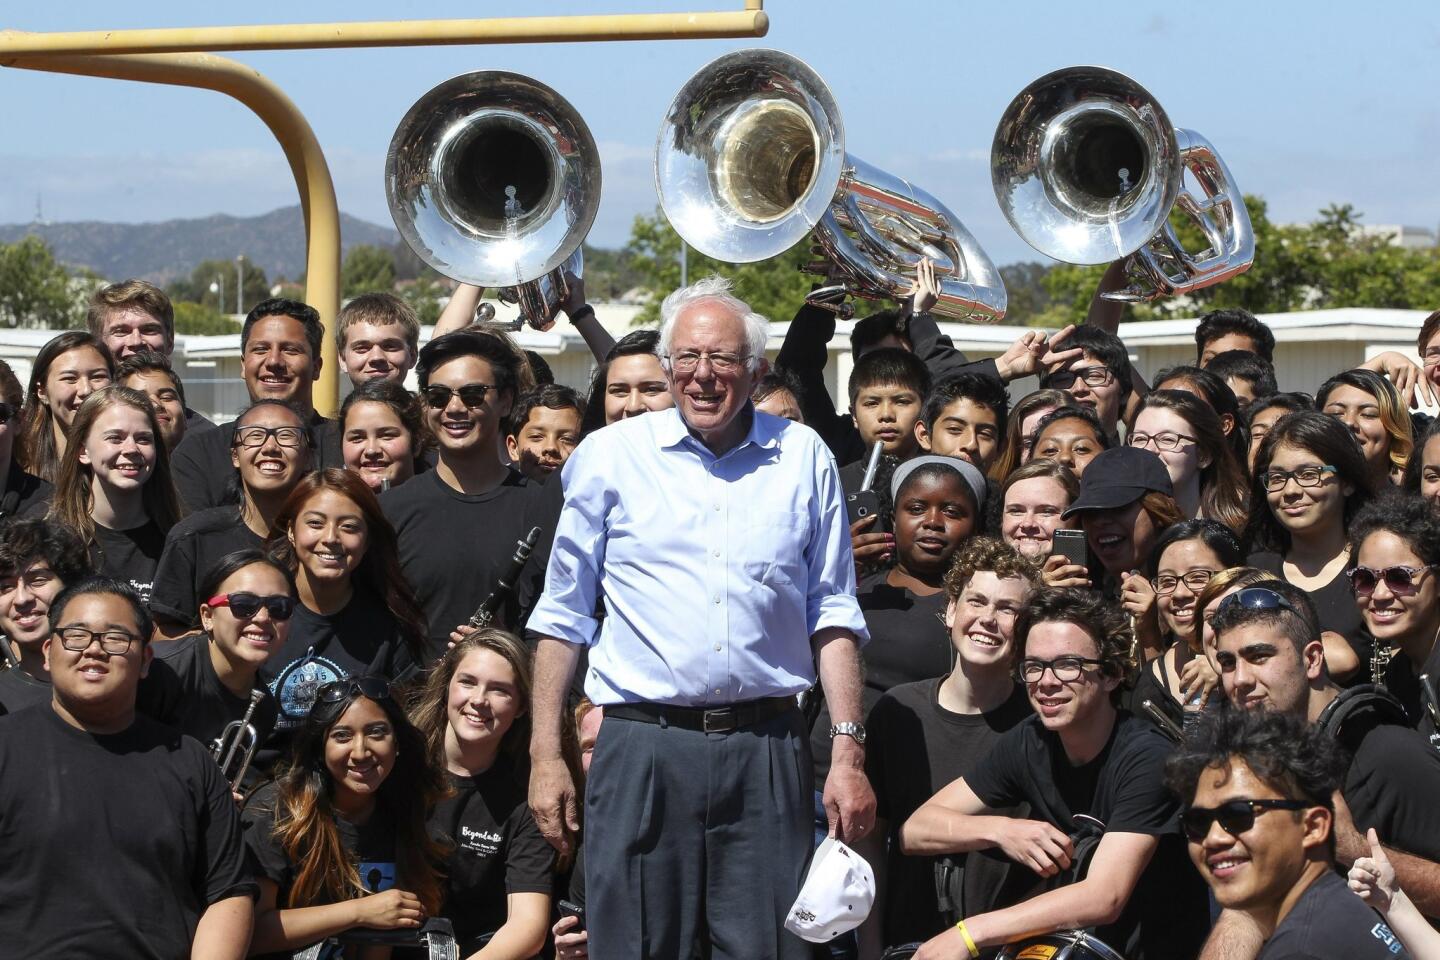 After speaking at his campaign rally in the Rancho Buena Vista High School football stadium, Democratic presidential candidate Bernie Sanders poses for pictures with members of the school's marching band.